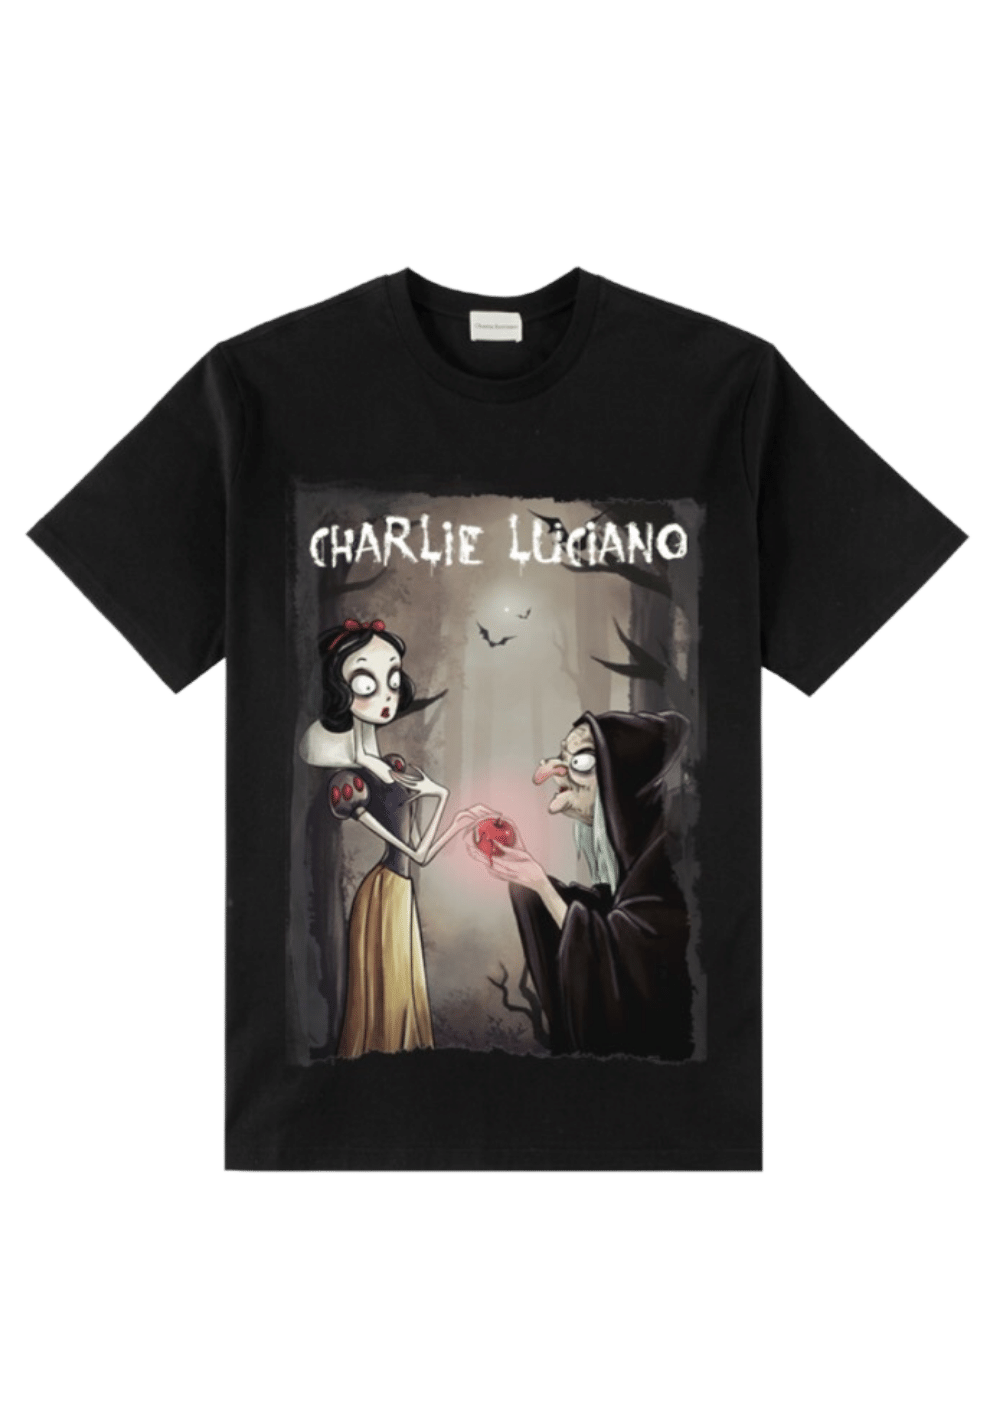 'Snow White And Witch' Print T-Shirt - PSYLOS 1, 'Snow White And Witch' Print T-Shirt, T-Shirt, Charlie Luciano, PSYLOS 1